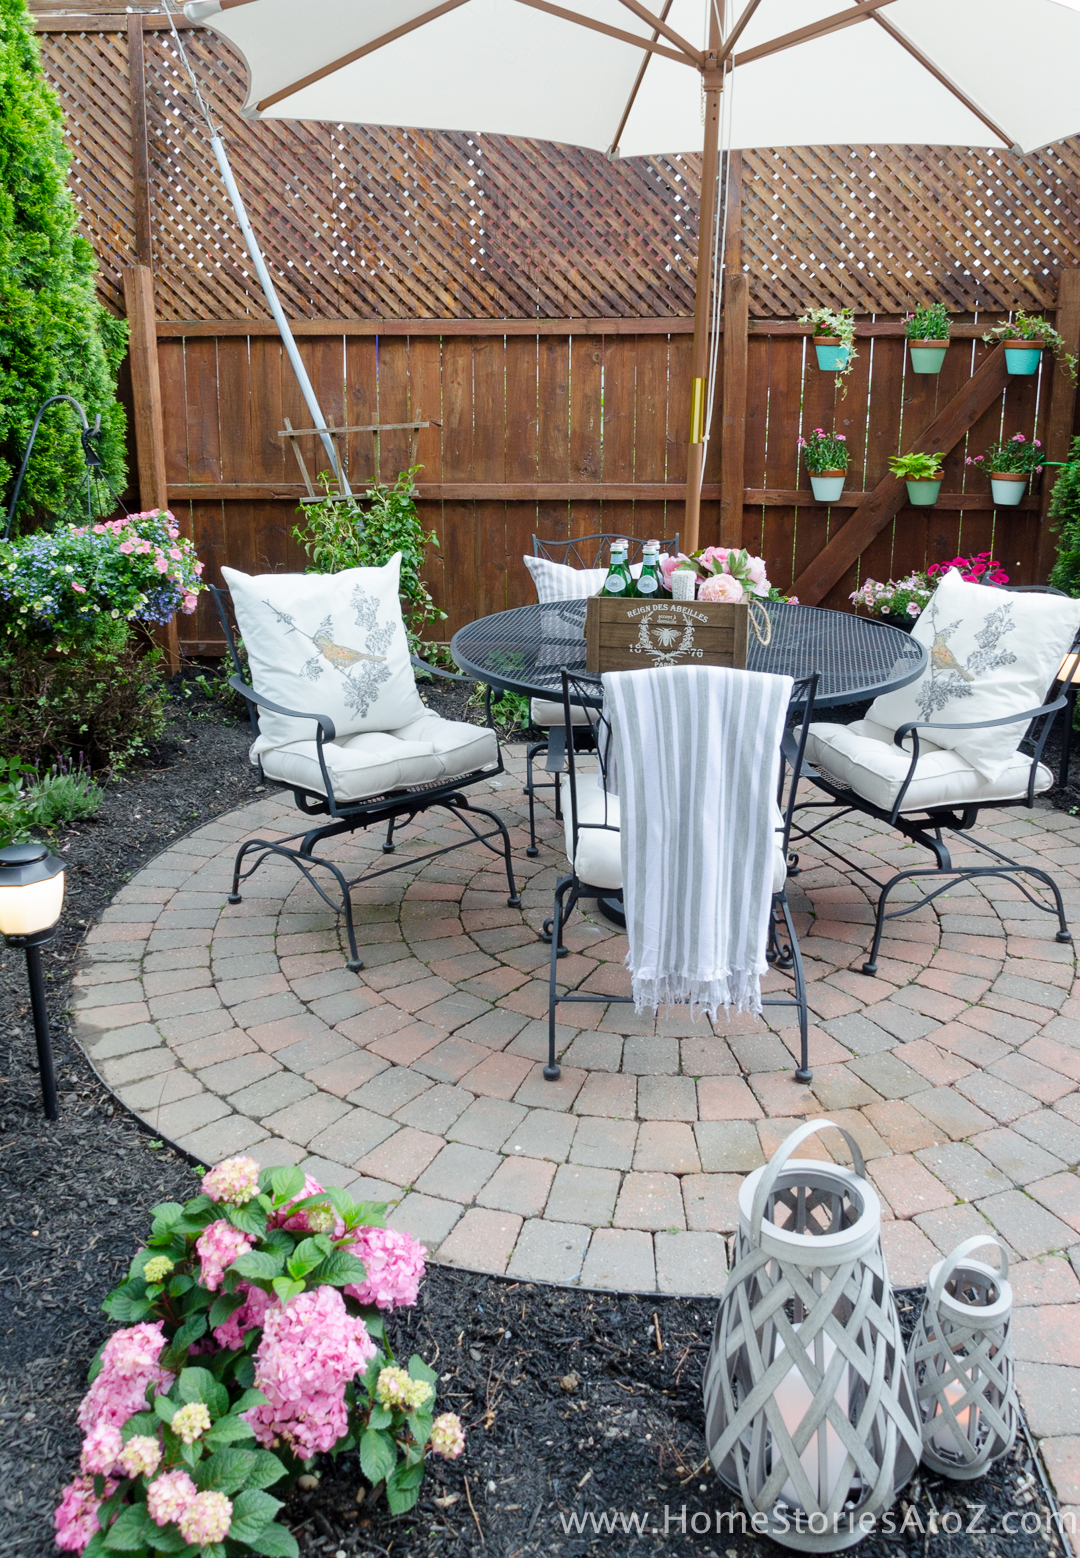 A round brick patio with a round table.